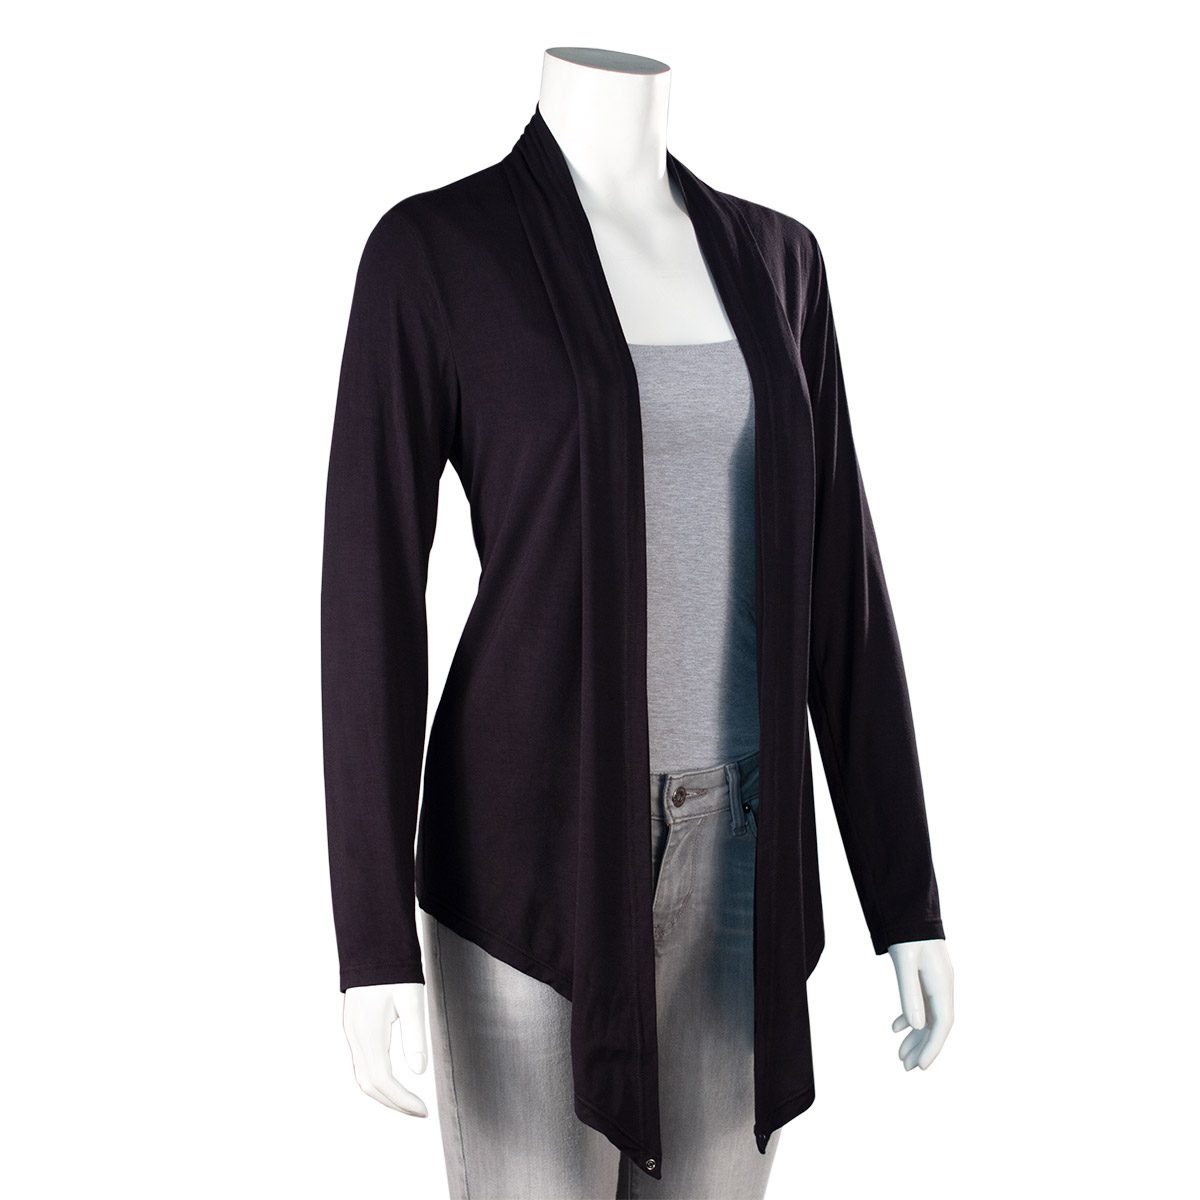 Additional View of Elesk Apparel Women's Fashion Evolution Cardigan Product Image